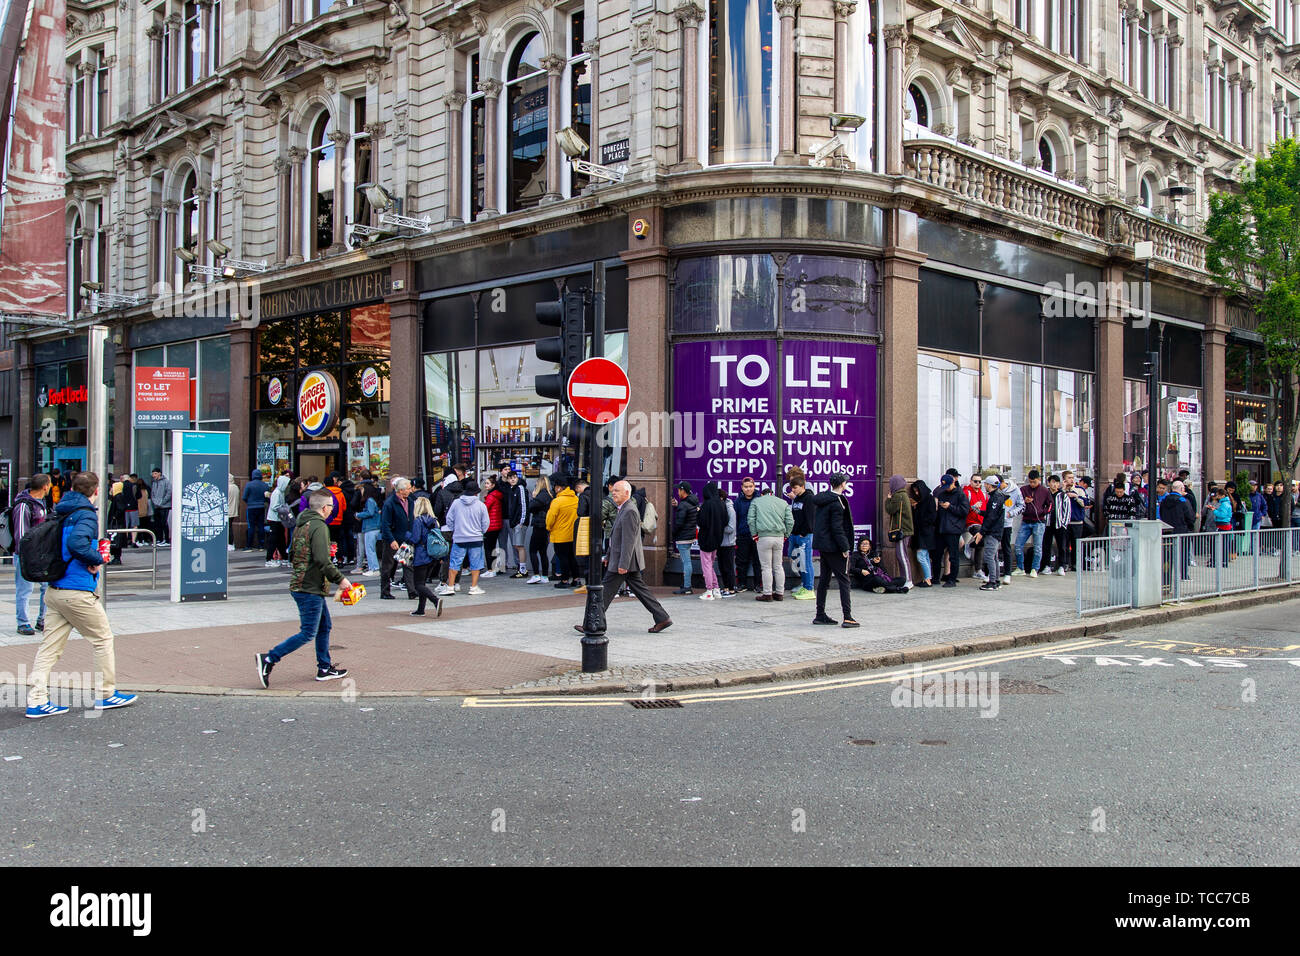 Donegall Place, Belfast, UK 7th June 2019. a Large queue gathers outside the Foot Locker store in Belfast City Centre the Yeezy Boost 350 V2 went on sale at 9:00am this